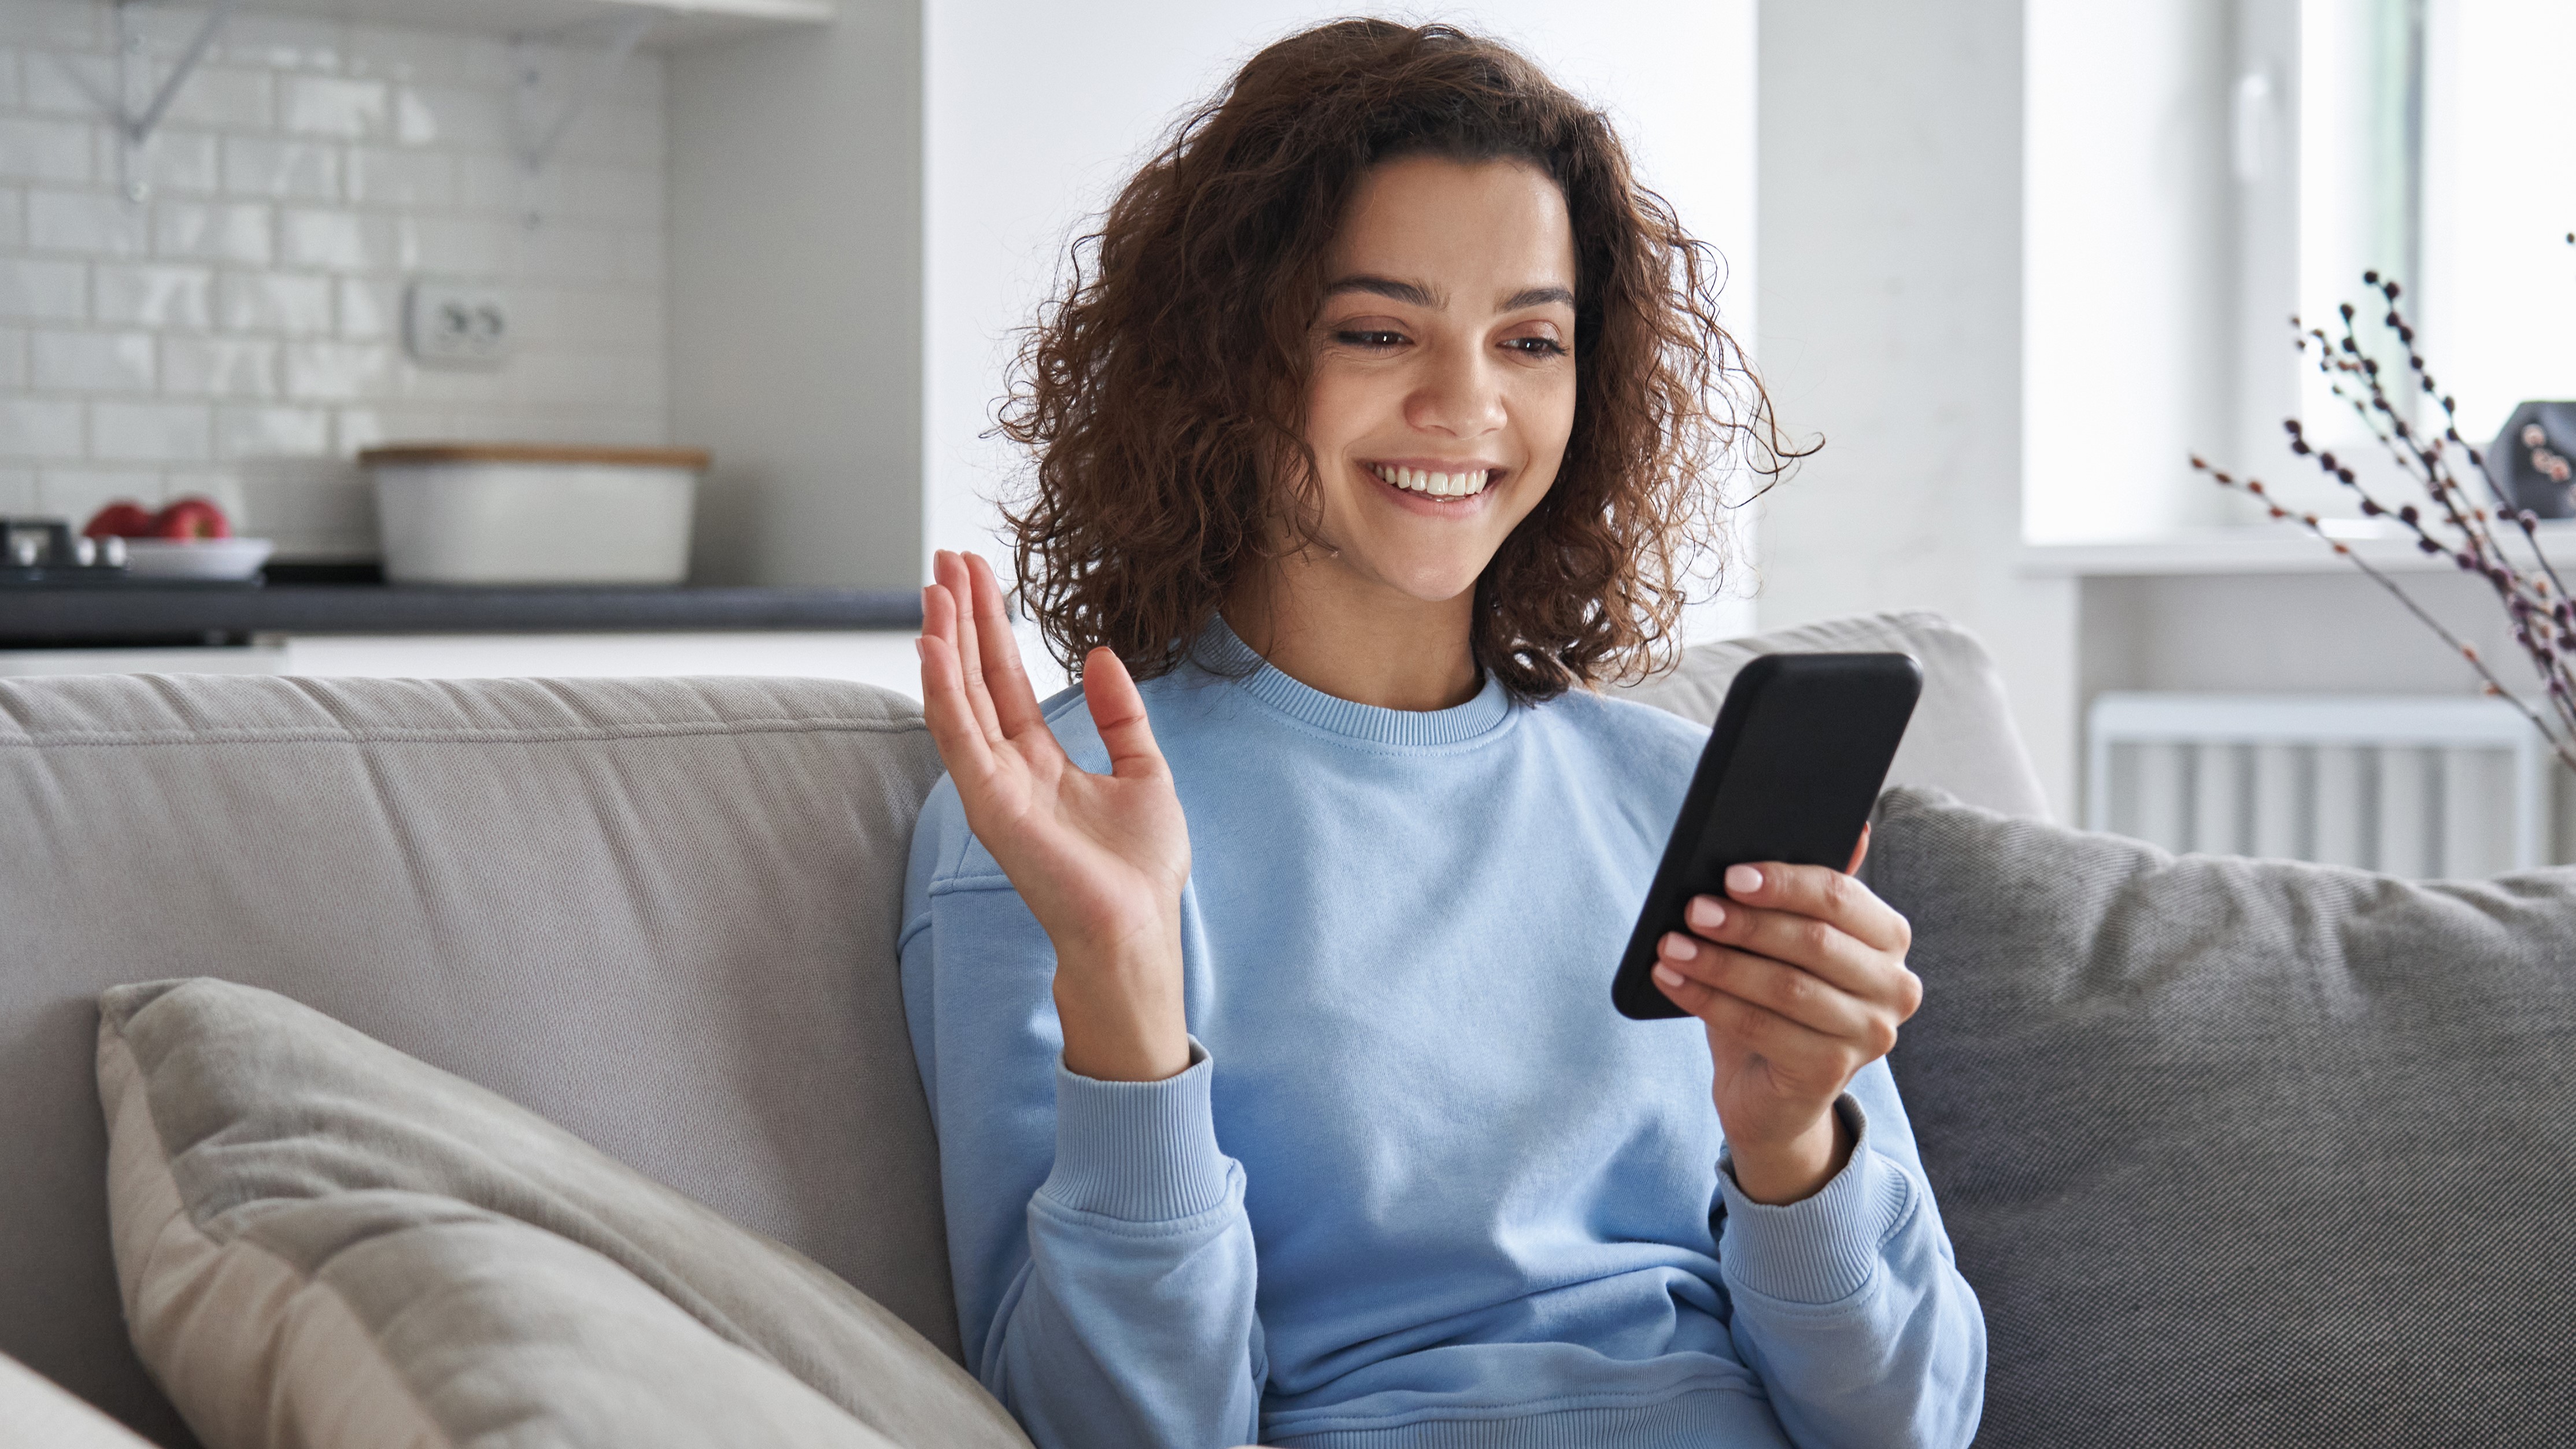 Woman smiling widely and looking at her phone, while holding her hand up